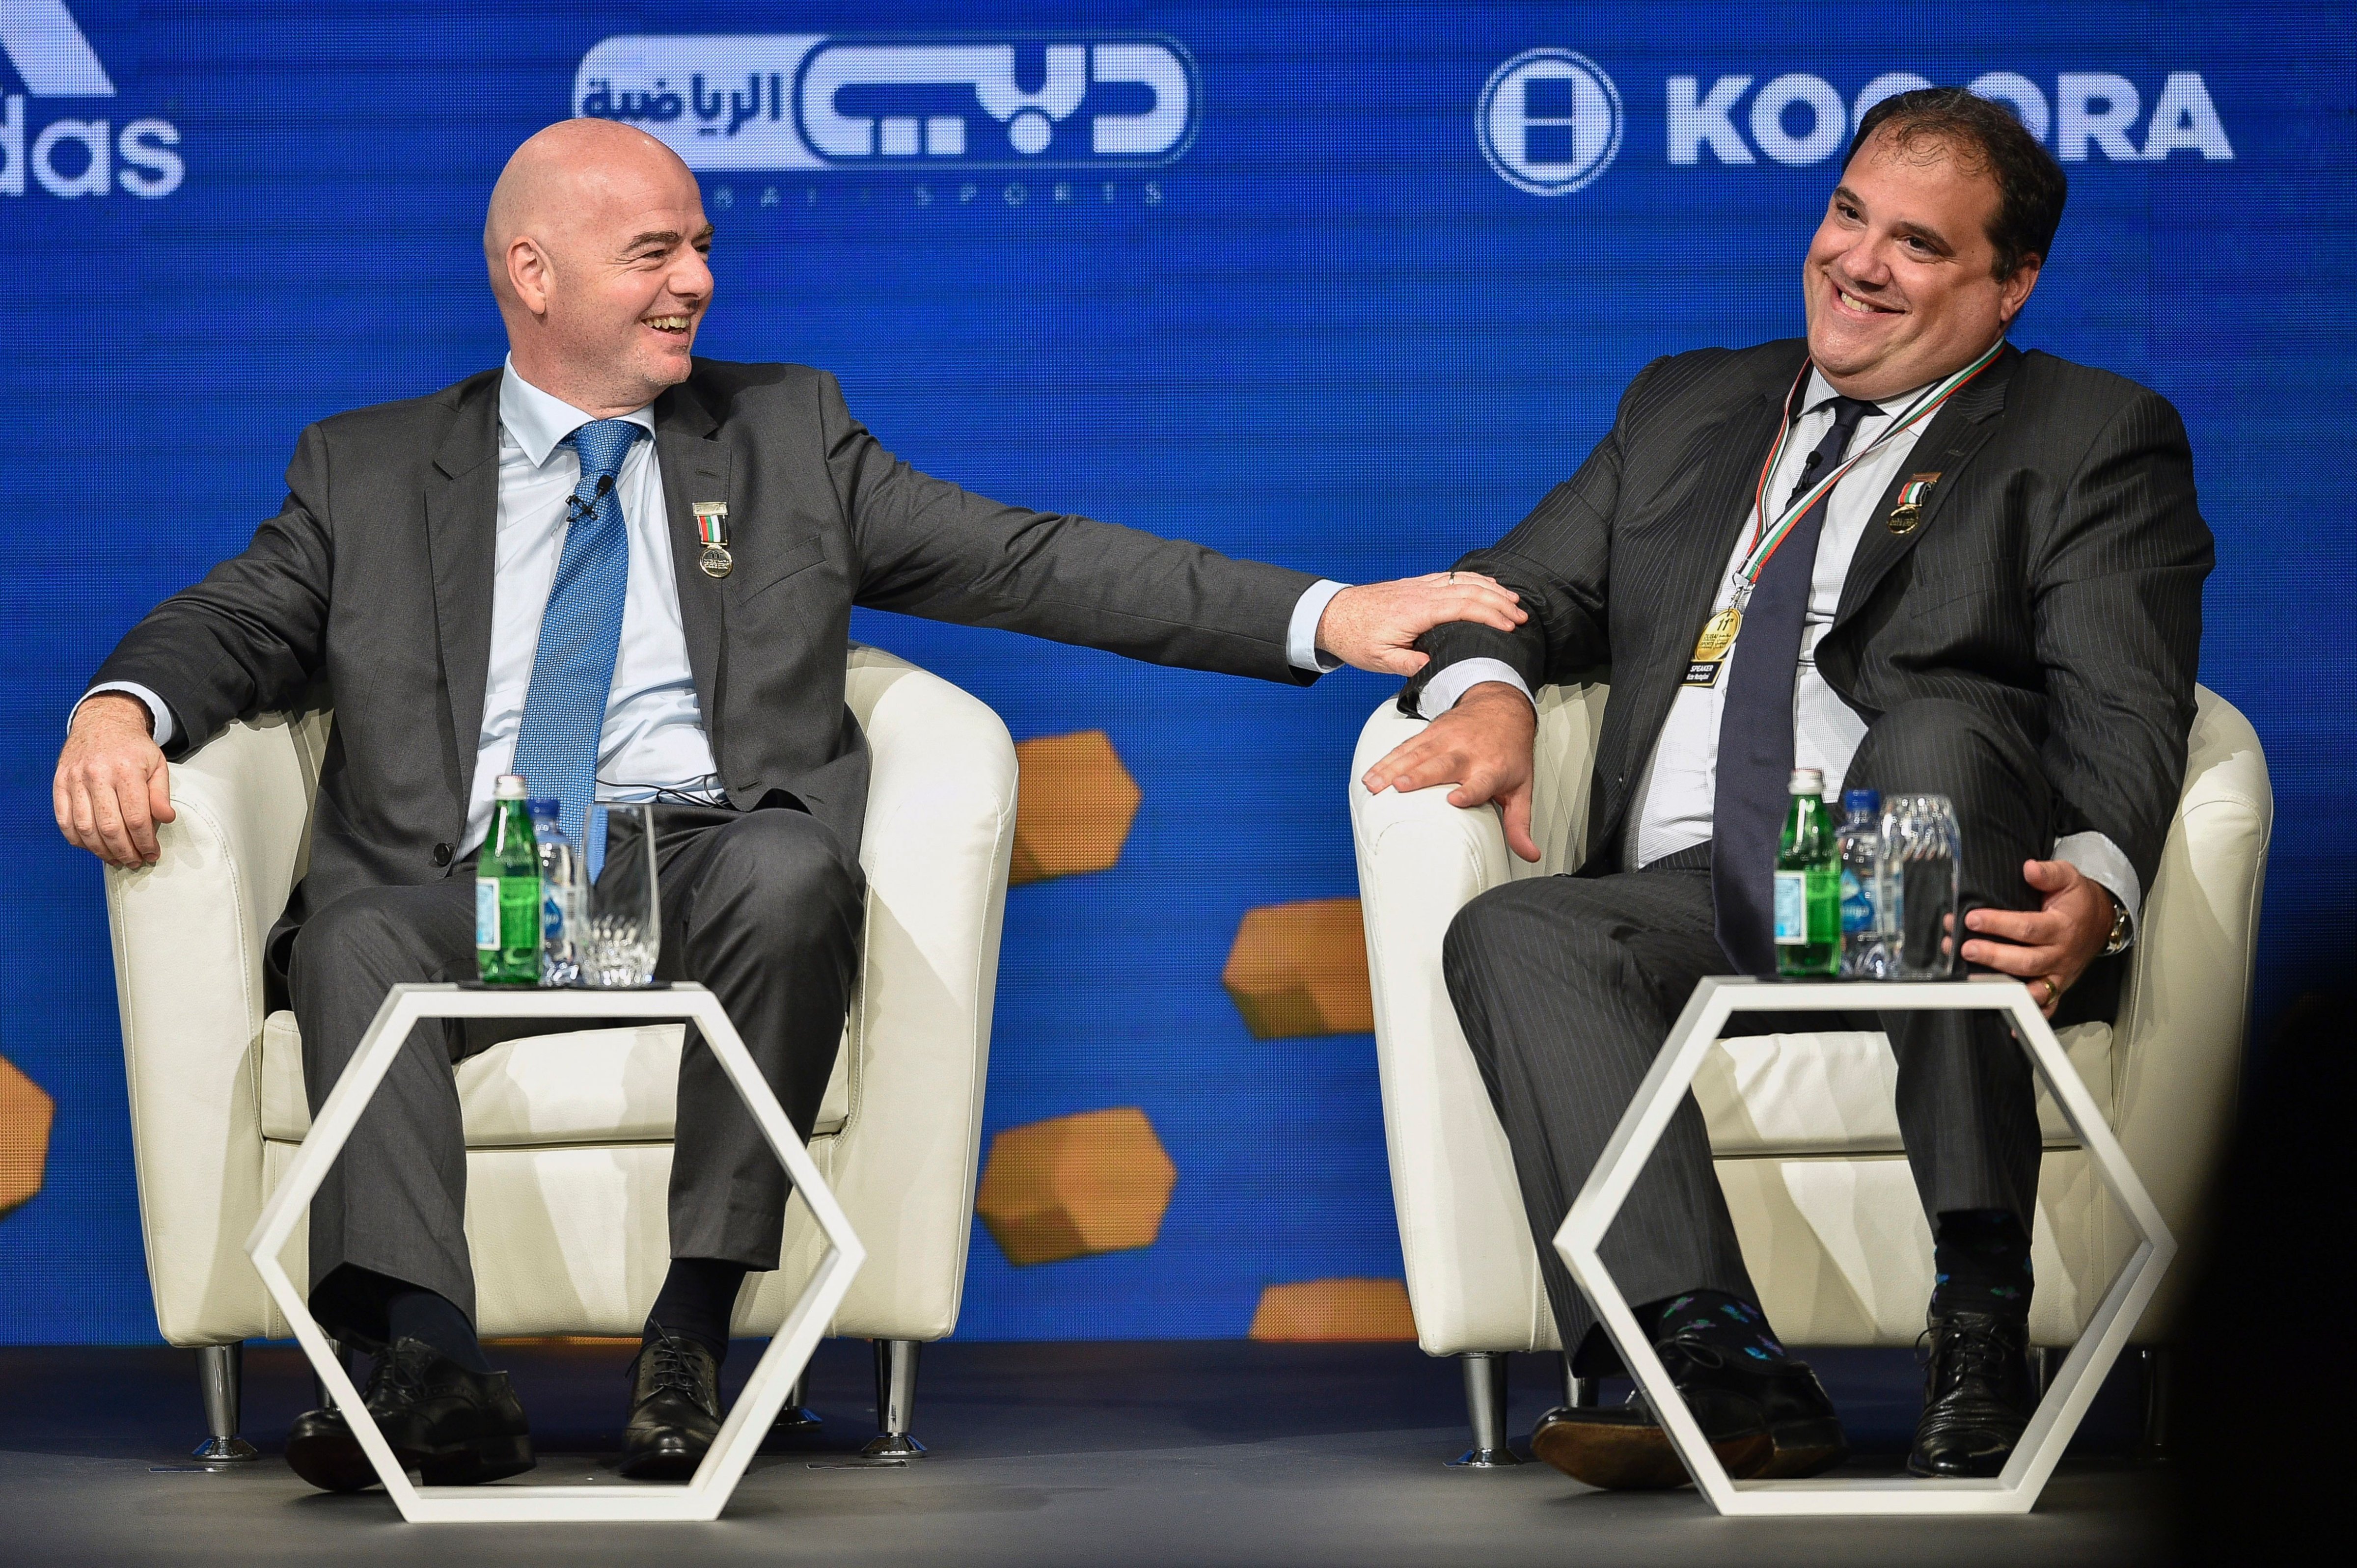 FIFA President, Gianni Infantino (L), talks with Victor Montagliani, CONCACAF President, during the Dubai international Sports conference at Madinat Jumeirah in Dubai on December 28, 2016. (Stringer—AFP/Getty Images)